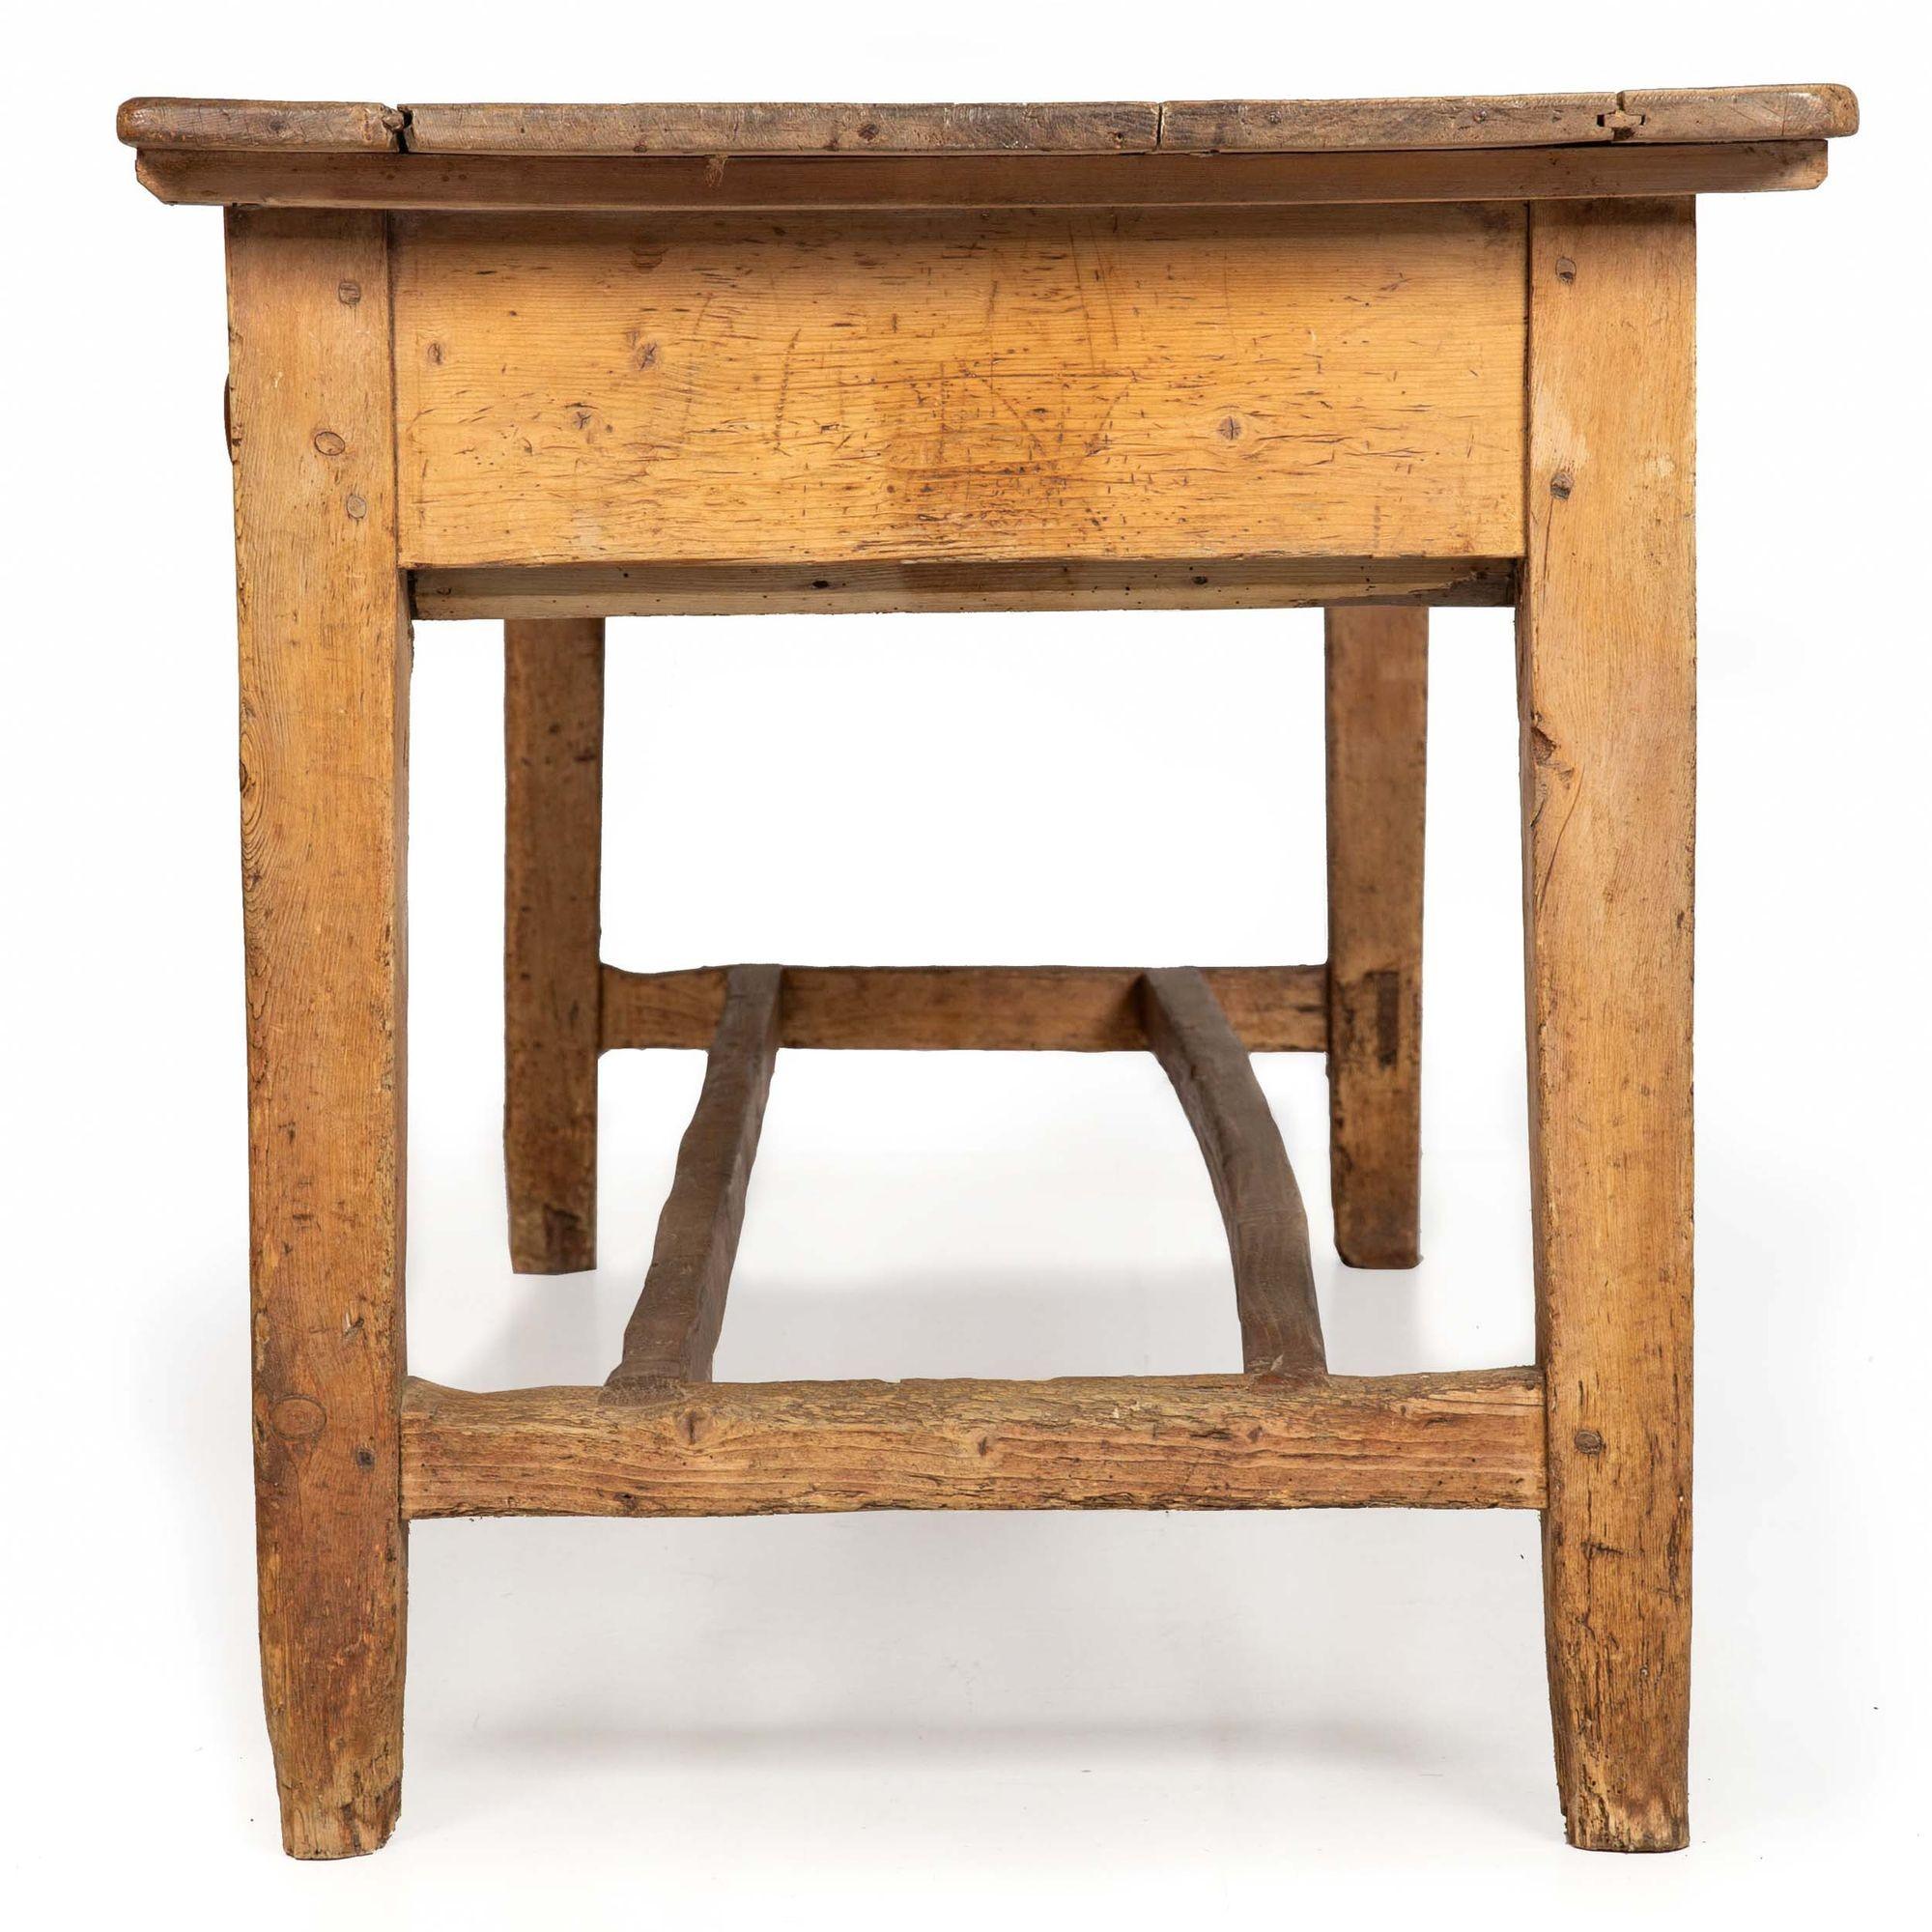 Worn and Patinated English Antique Pine Tavern Table Desk In Good Condition For Sale In Shippensburg, PA